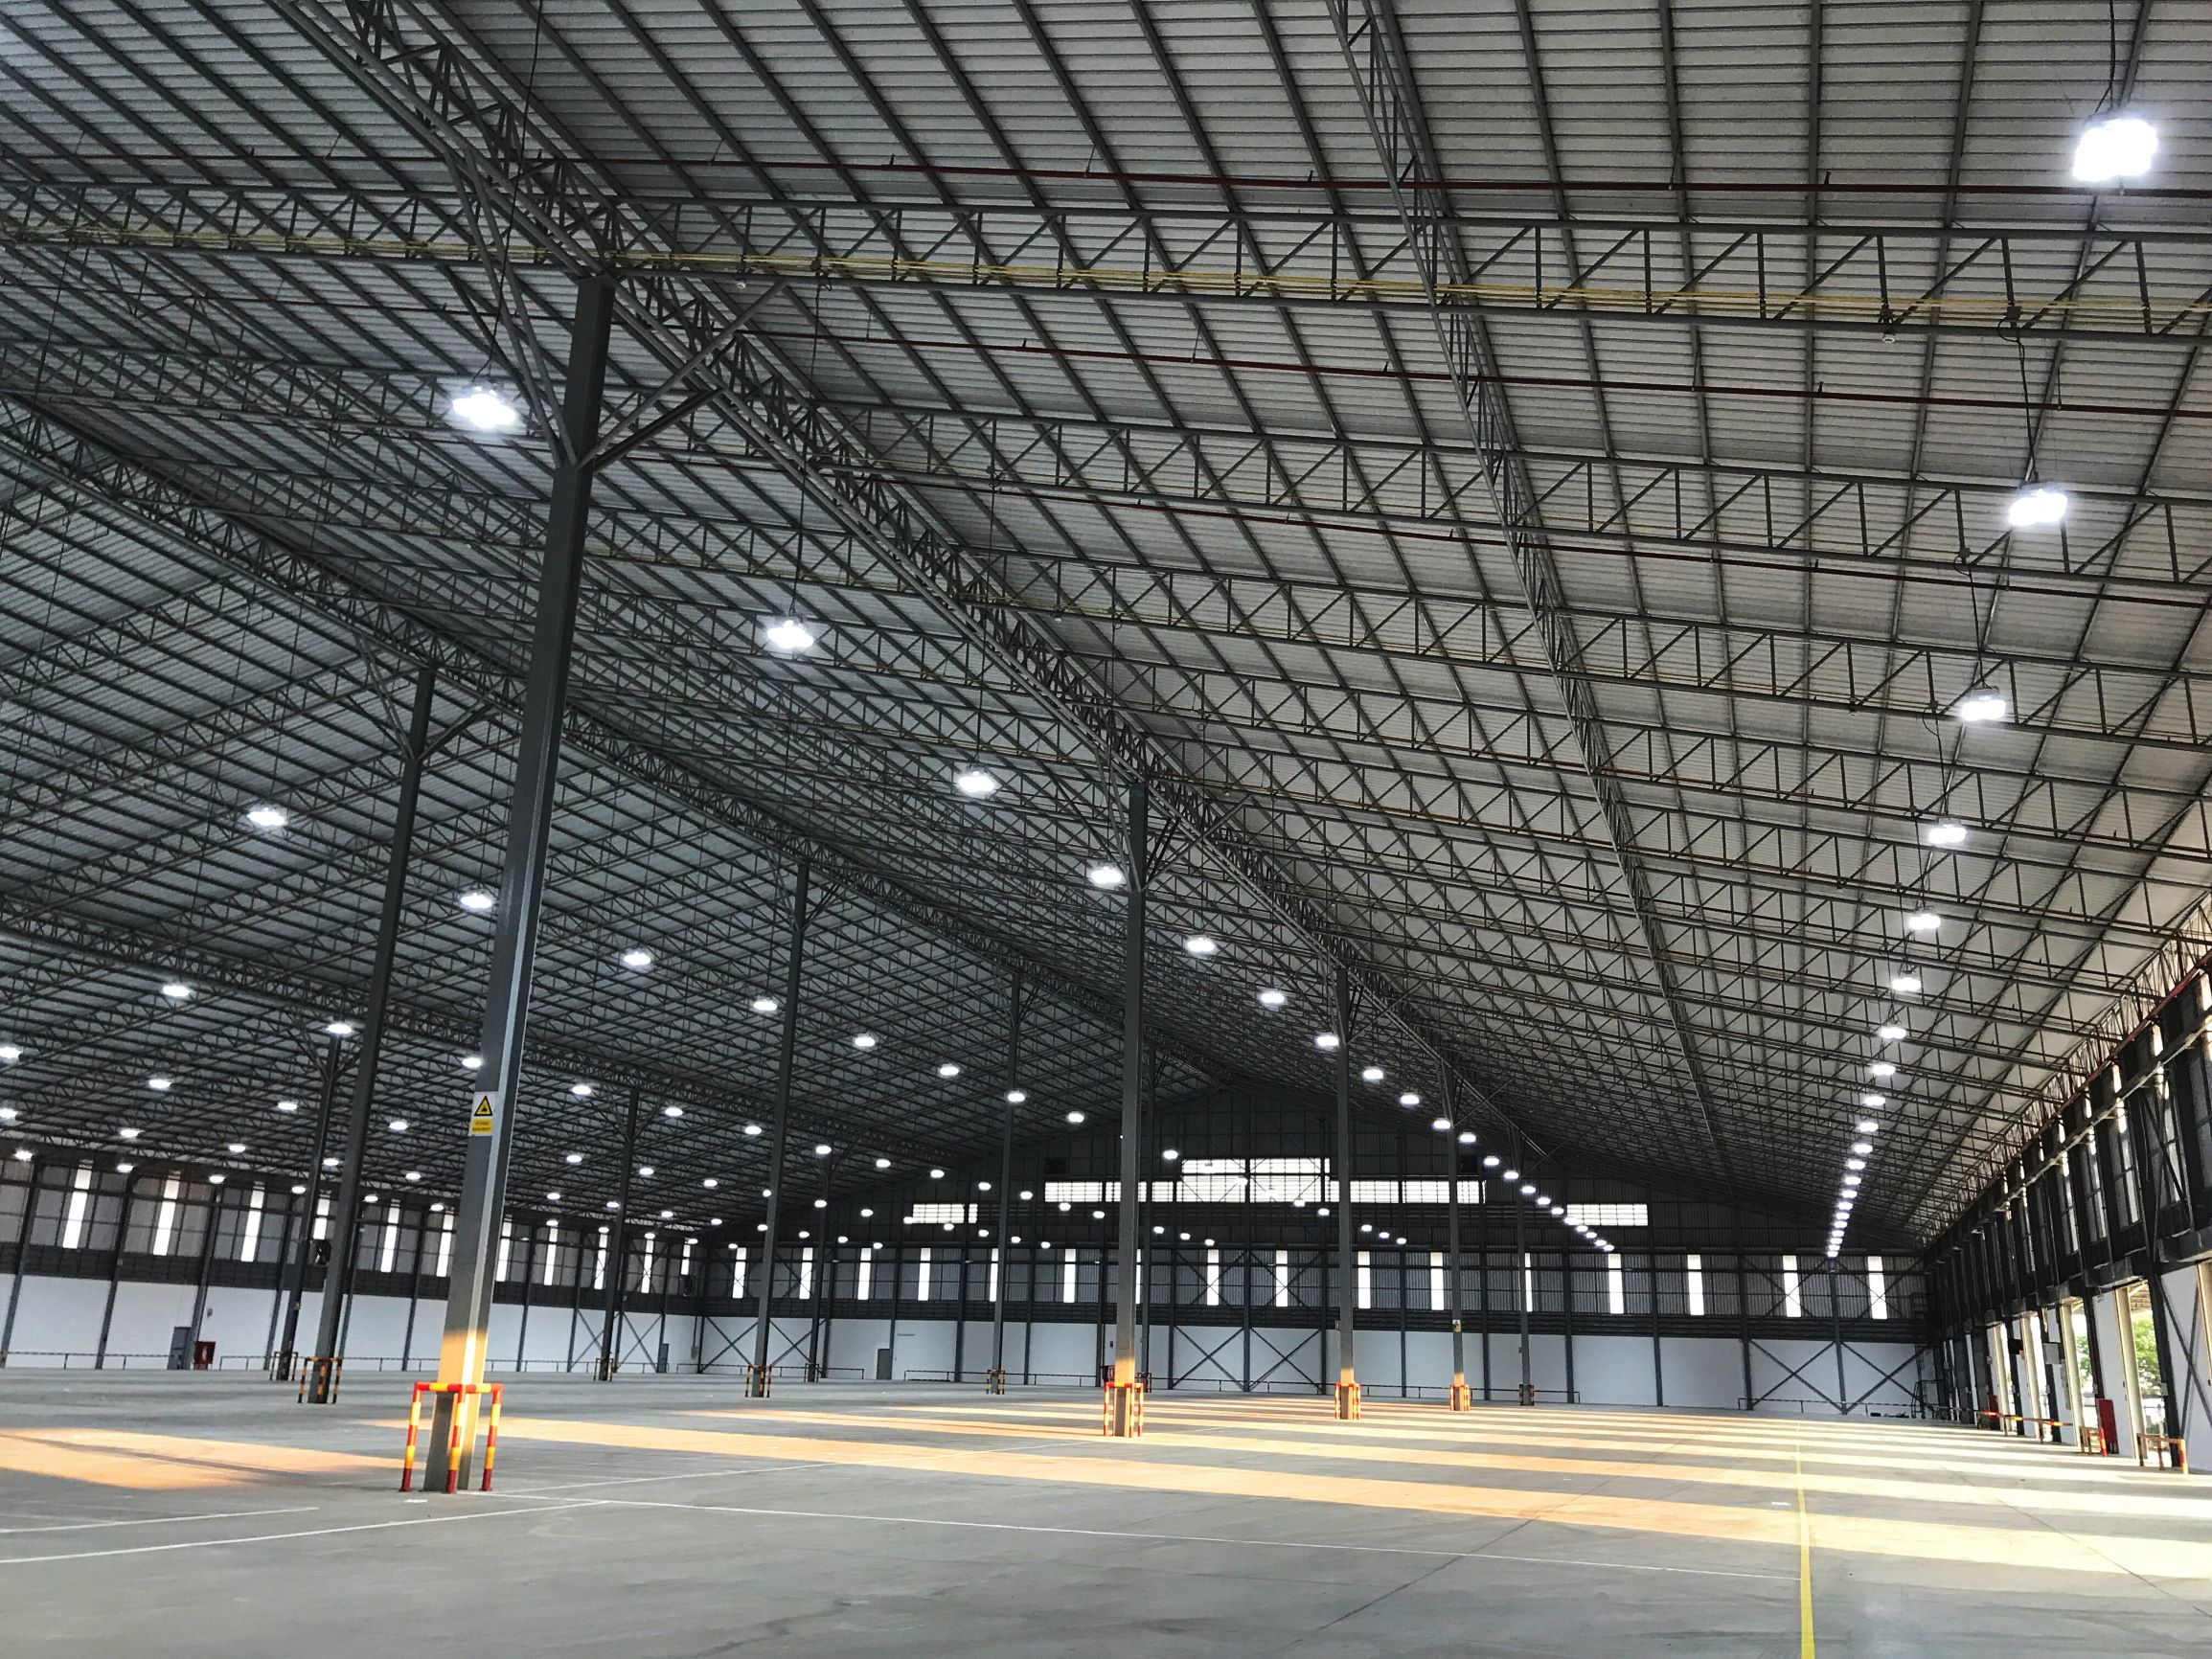 Optimising a company’s lighting system to save on electricity consumption